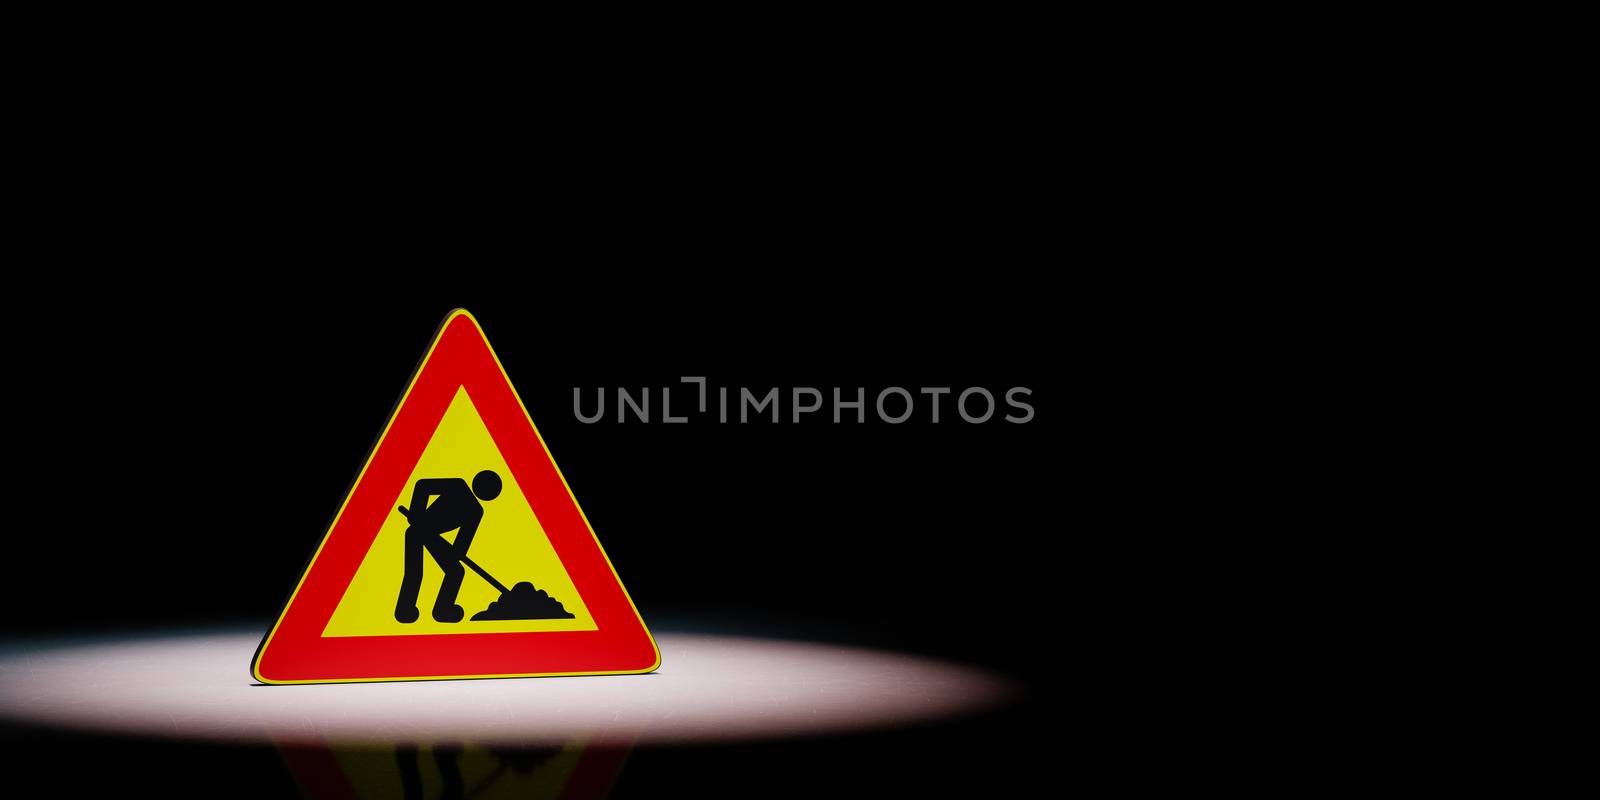 Men at Work Warning Triangle Road Sign Spotlighted on Black Background with Copy Space 3D Illustration